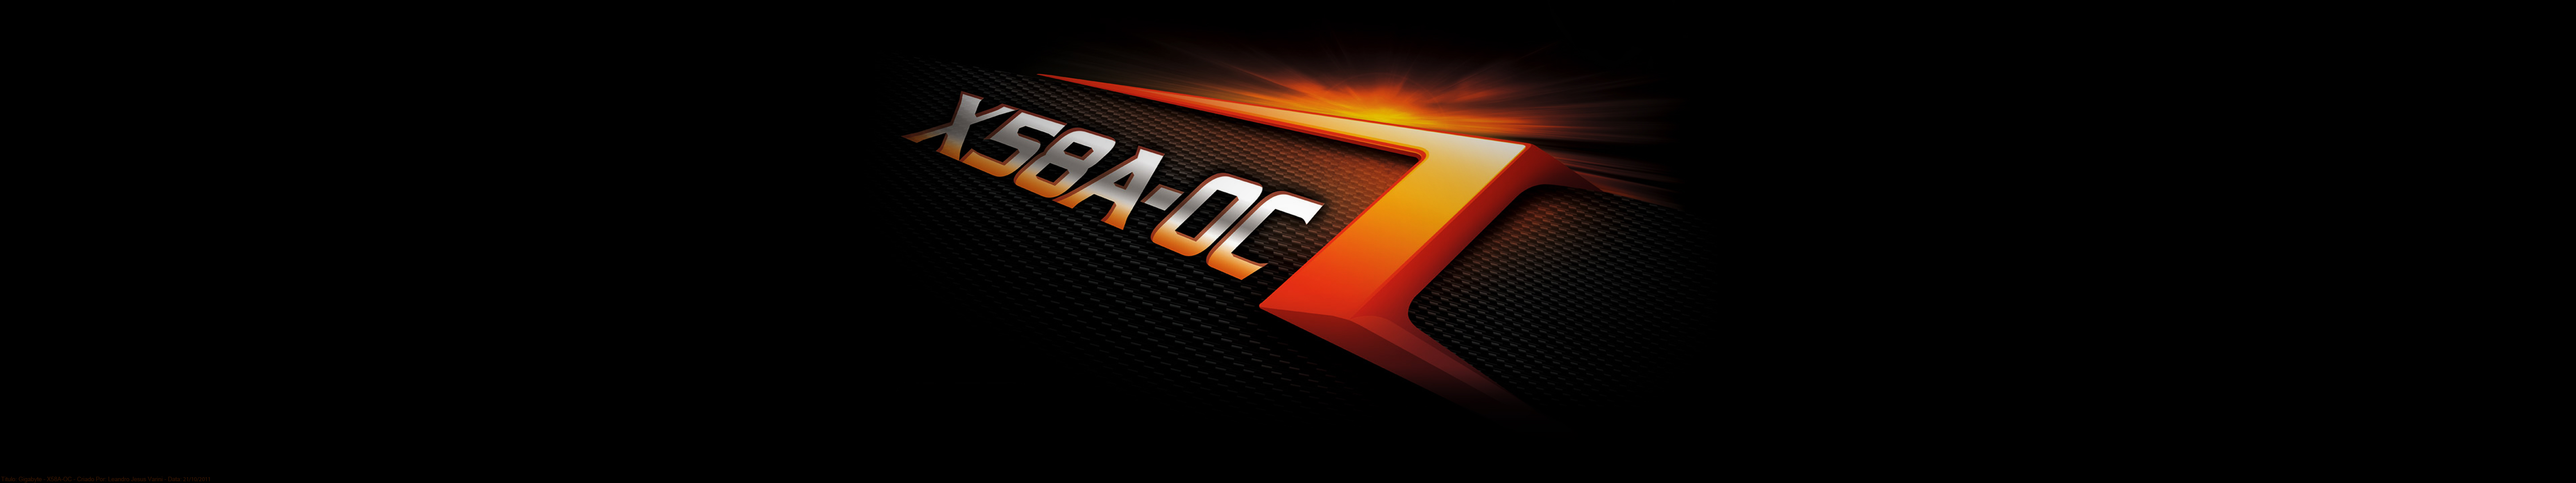 20+ Gigabyte HD Wallpapers and Backgrounds